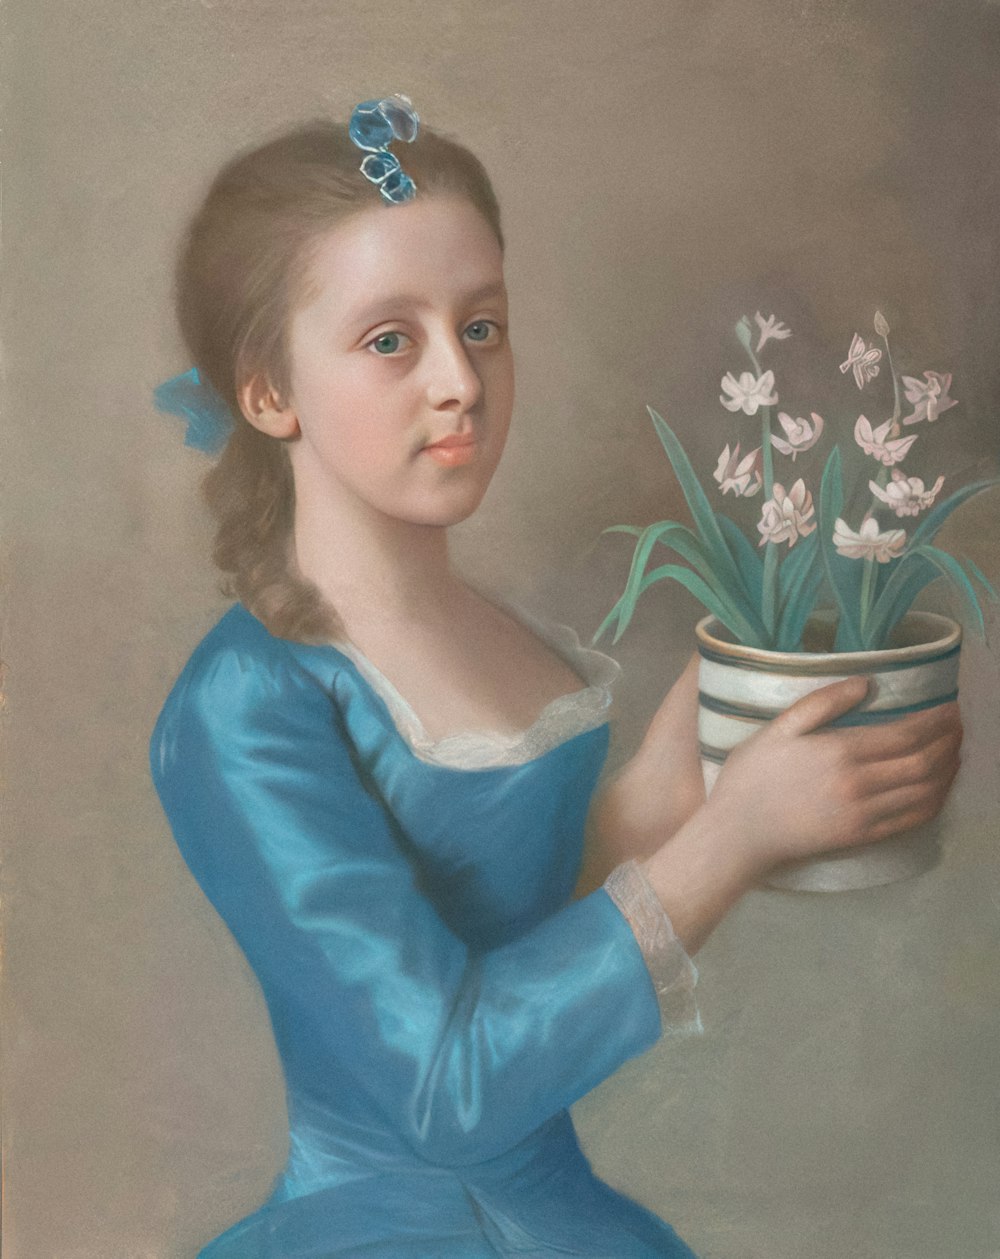 a painting of a young girl holding a potted plant